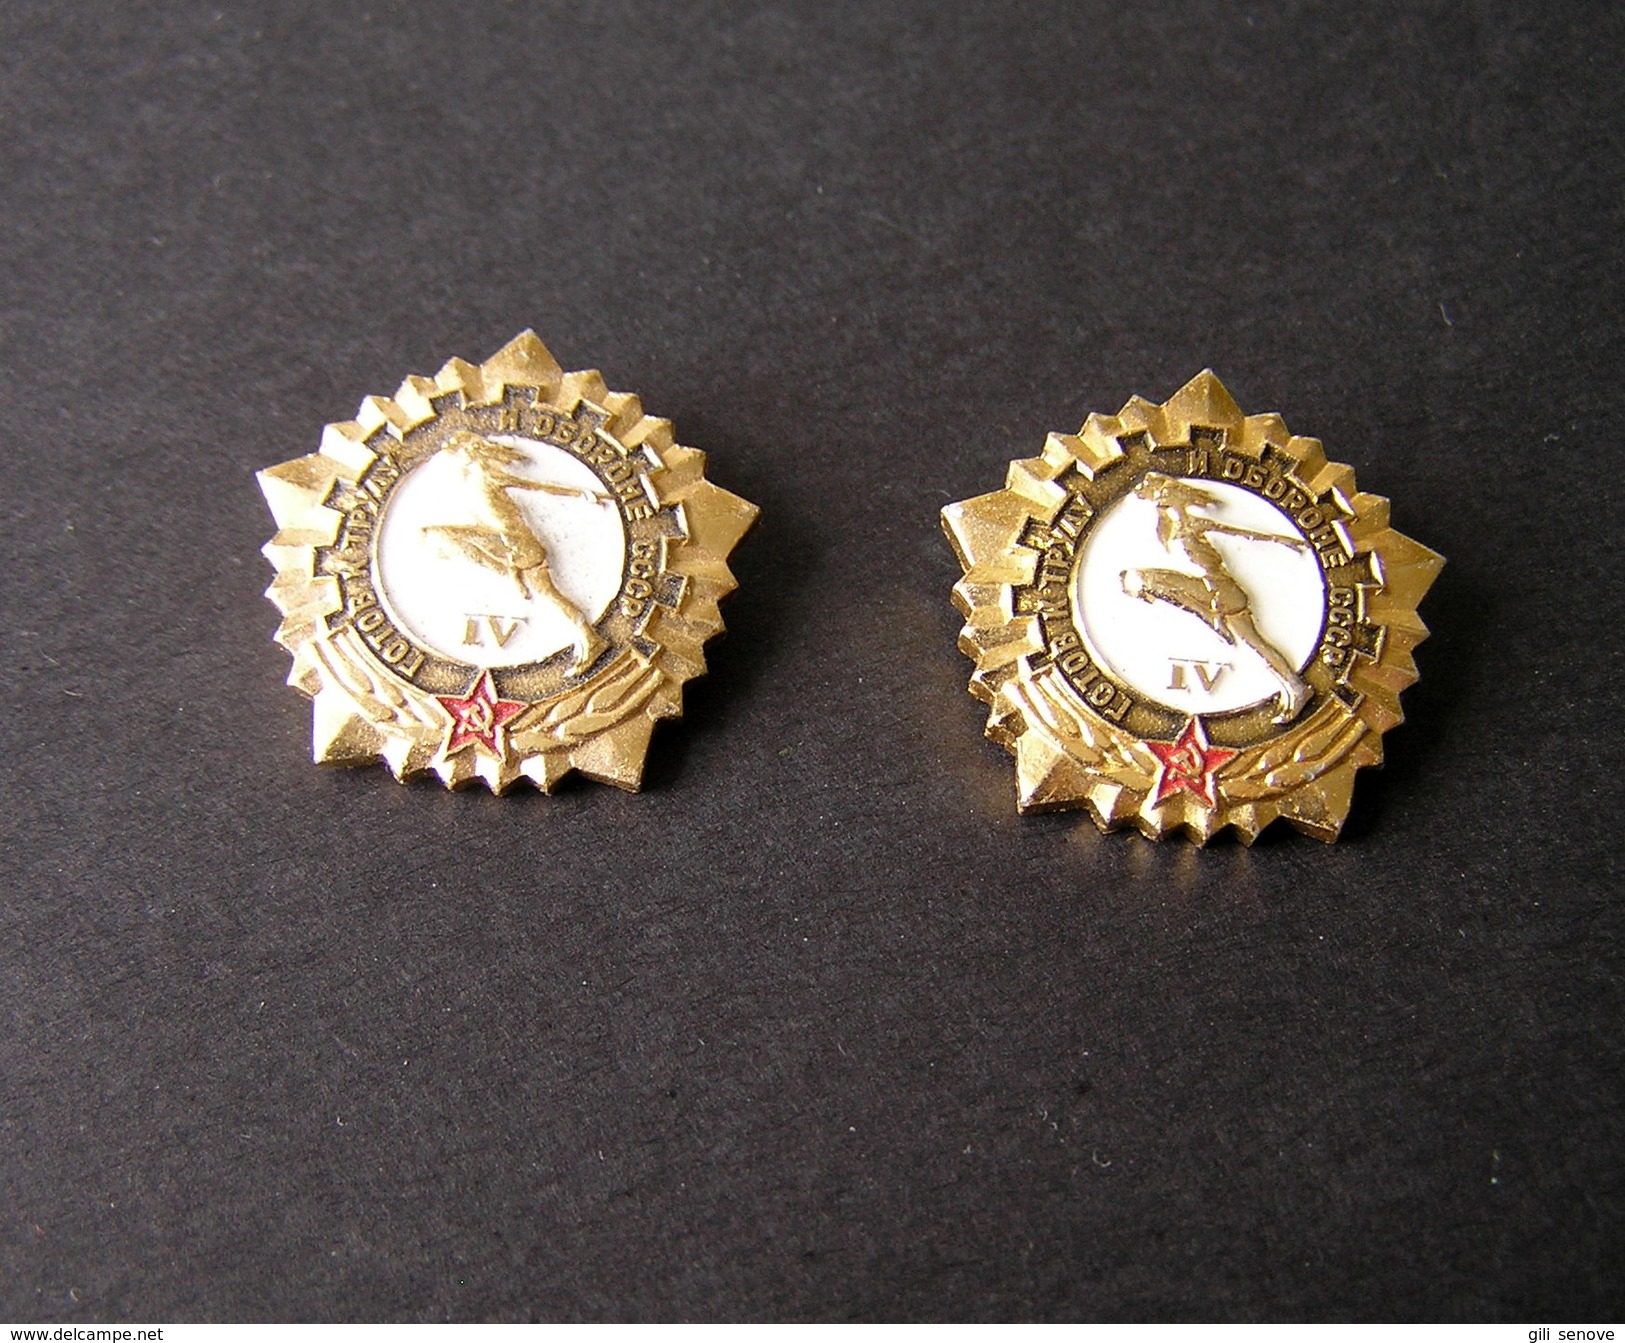 1970s USSR Russia Ready For Civil Defense And Labor IV Degree Pin Badges - Rusia